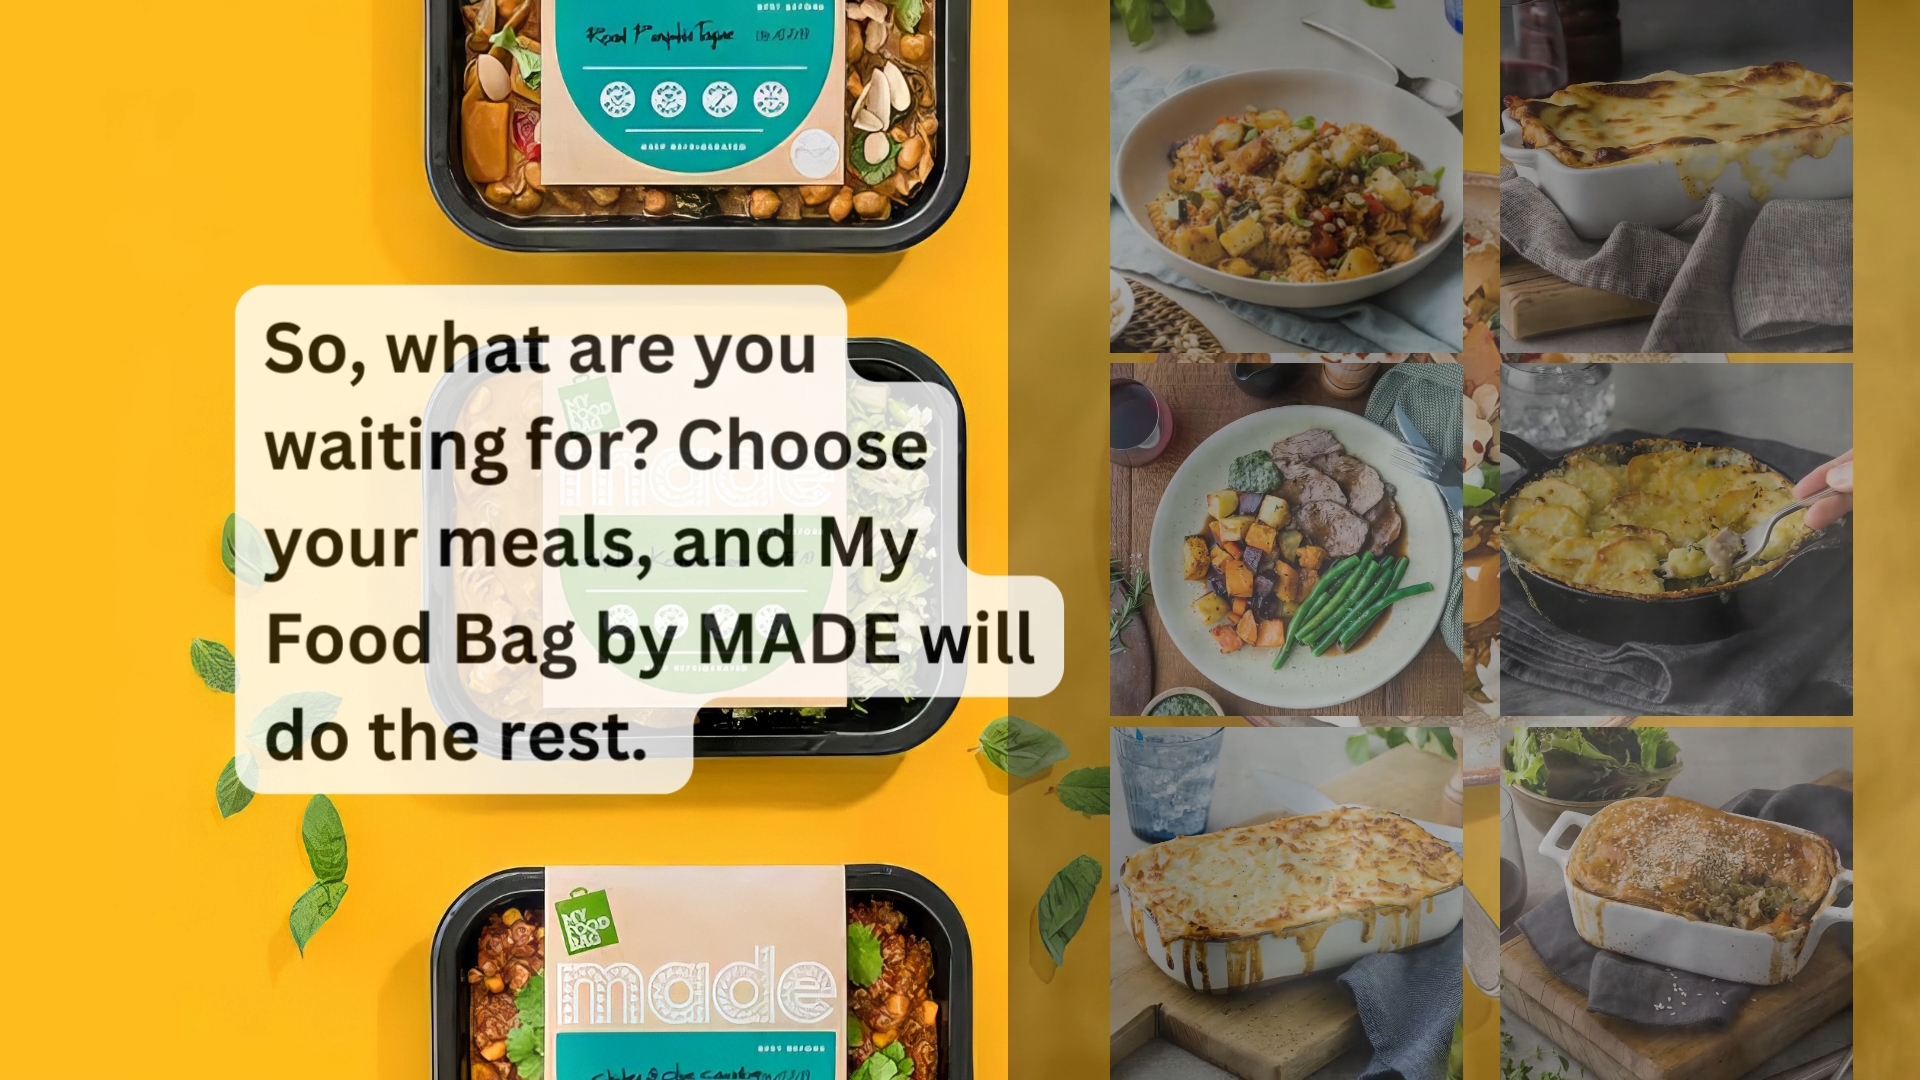 Get Made by My Food Bag Video Review - Home meal delivery service